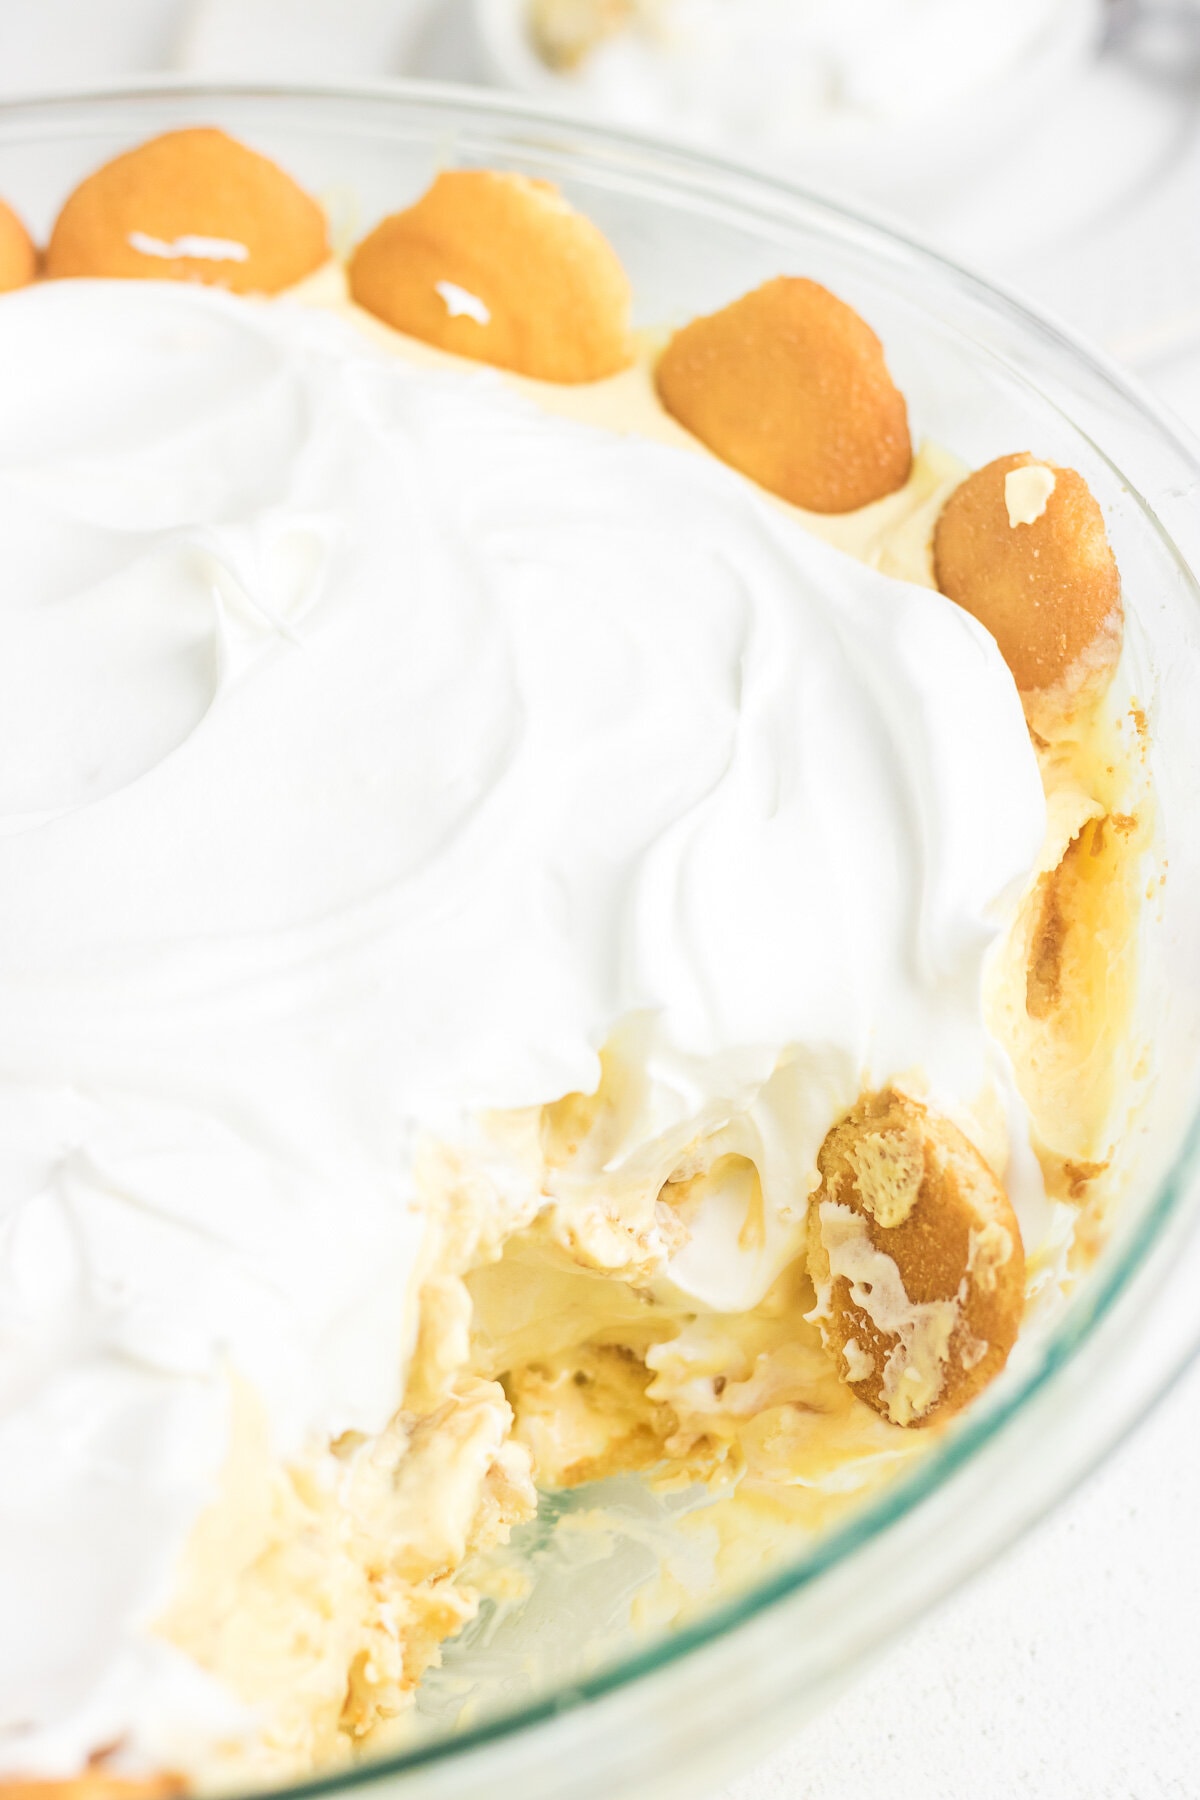 An up-close photo of banana pudding in a glass dish.